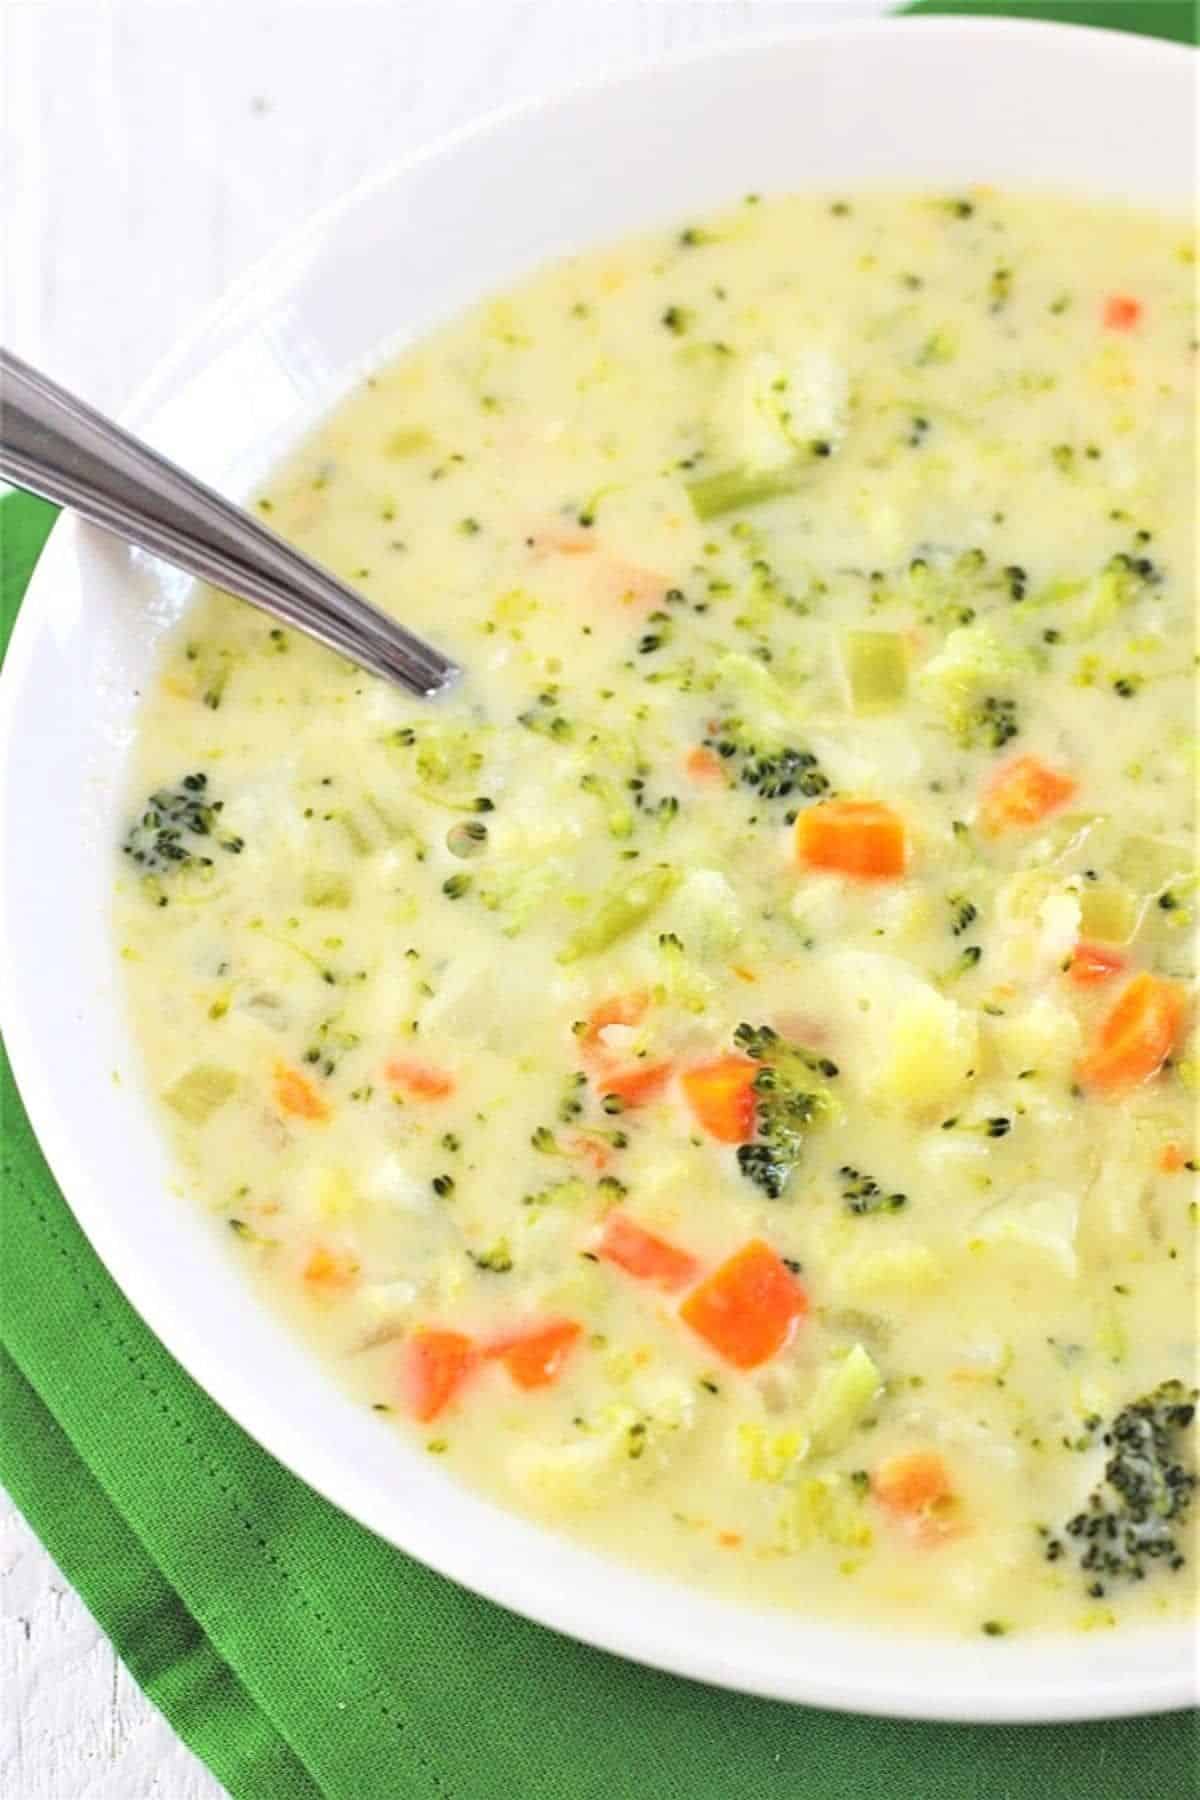 Creamy Broccoli and Cauliflower Cheese Soup in a white bowl with a spoon.